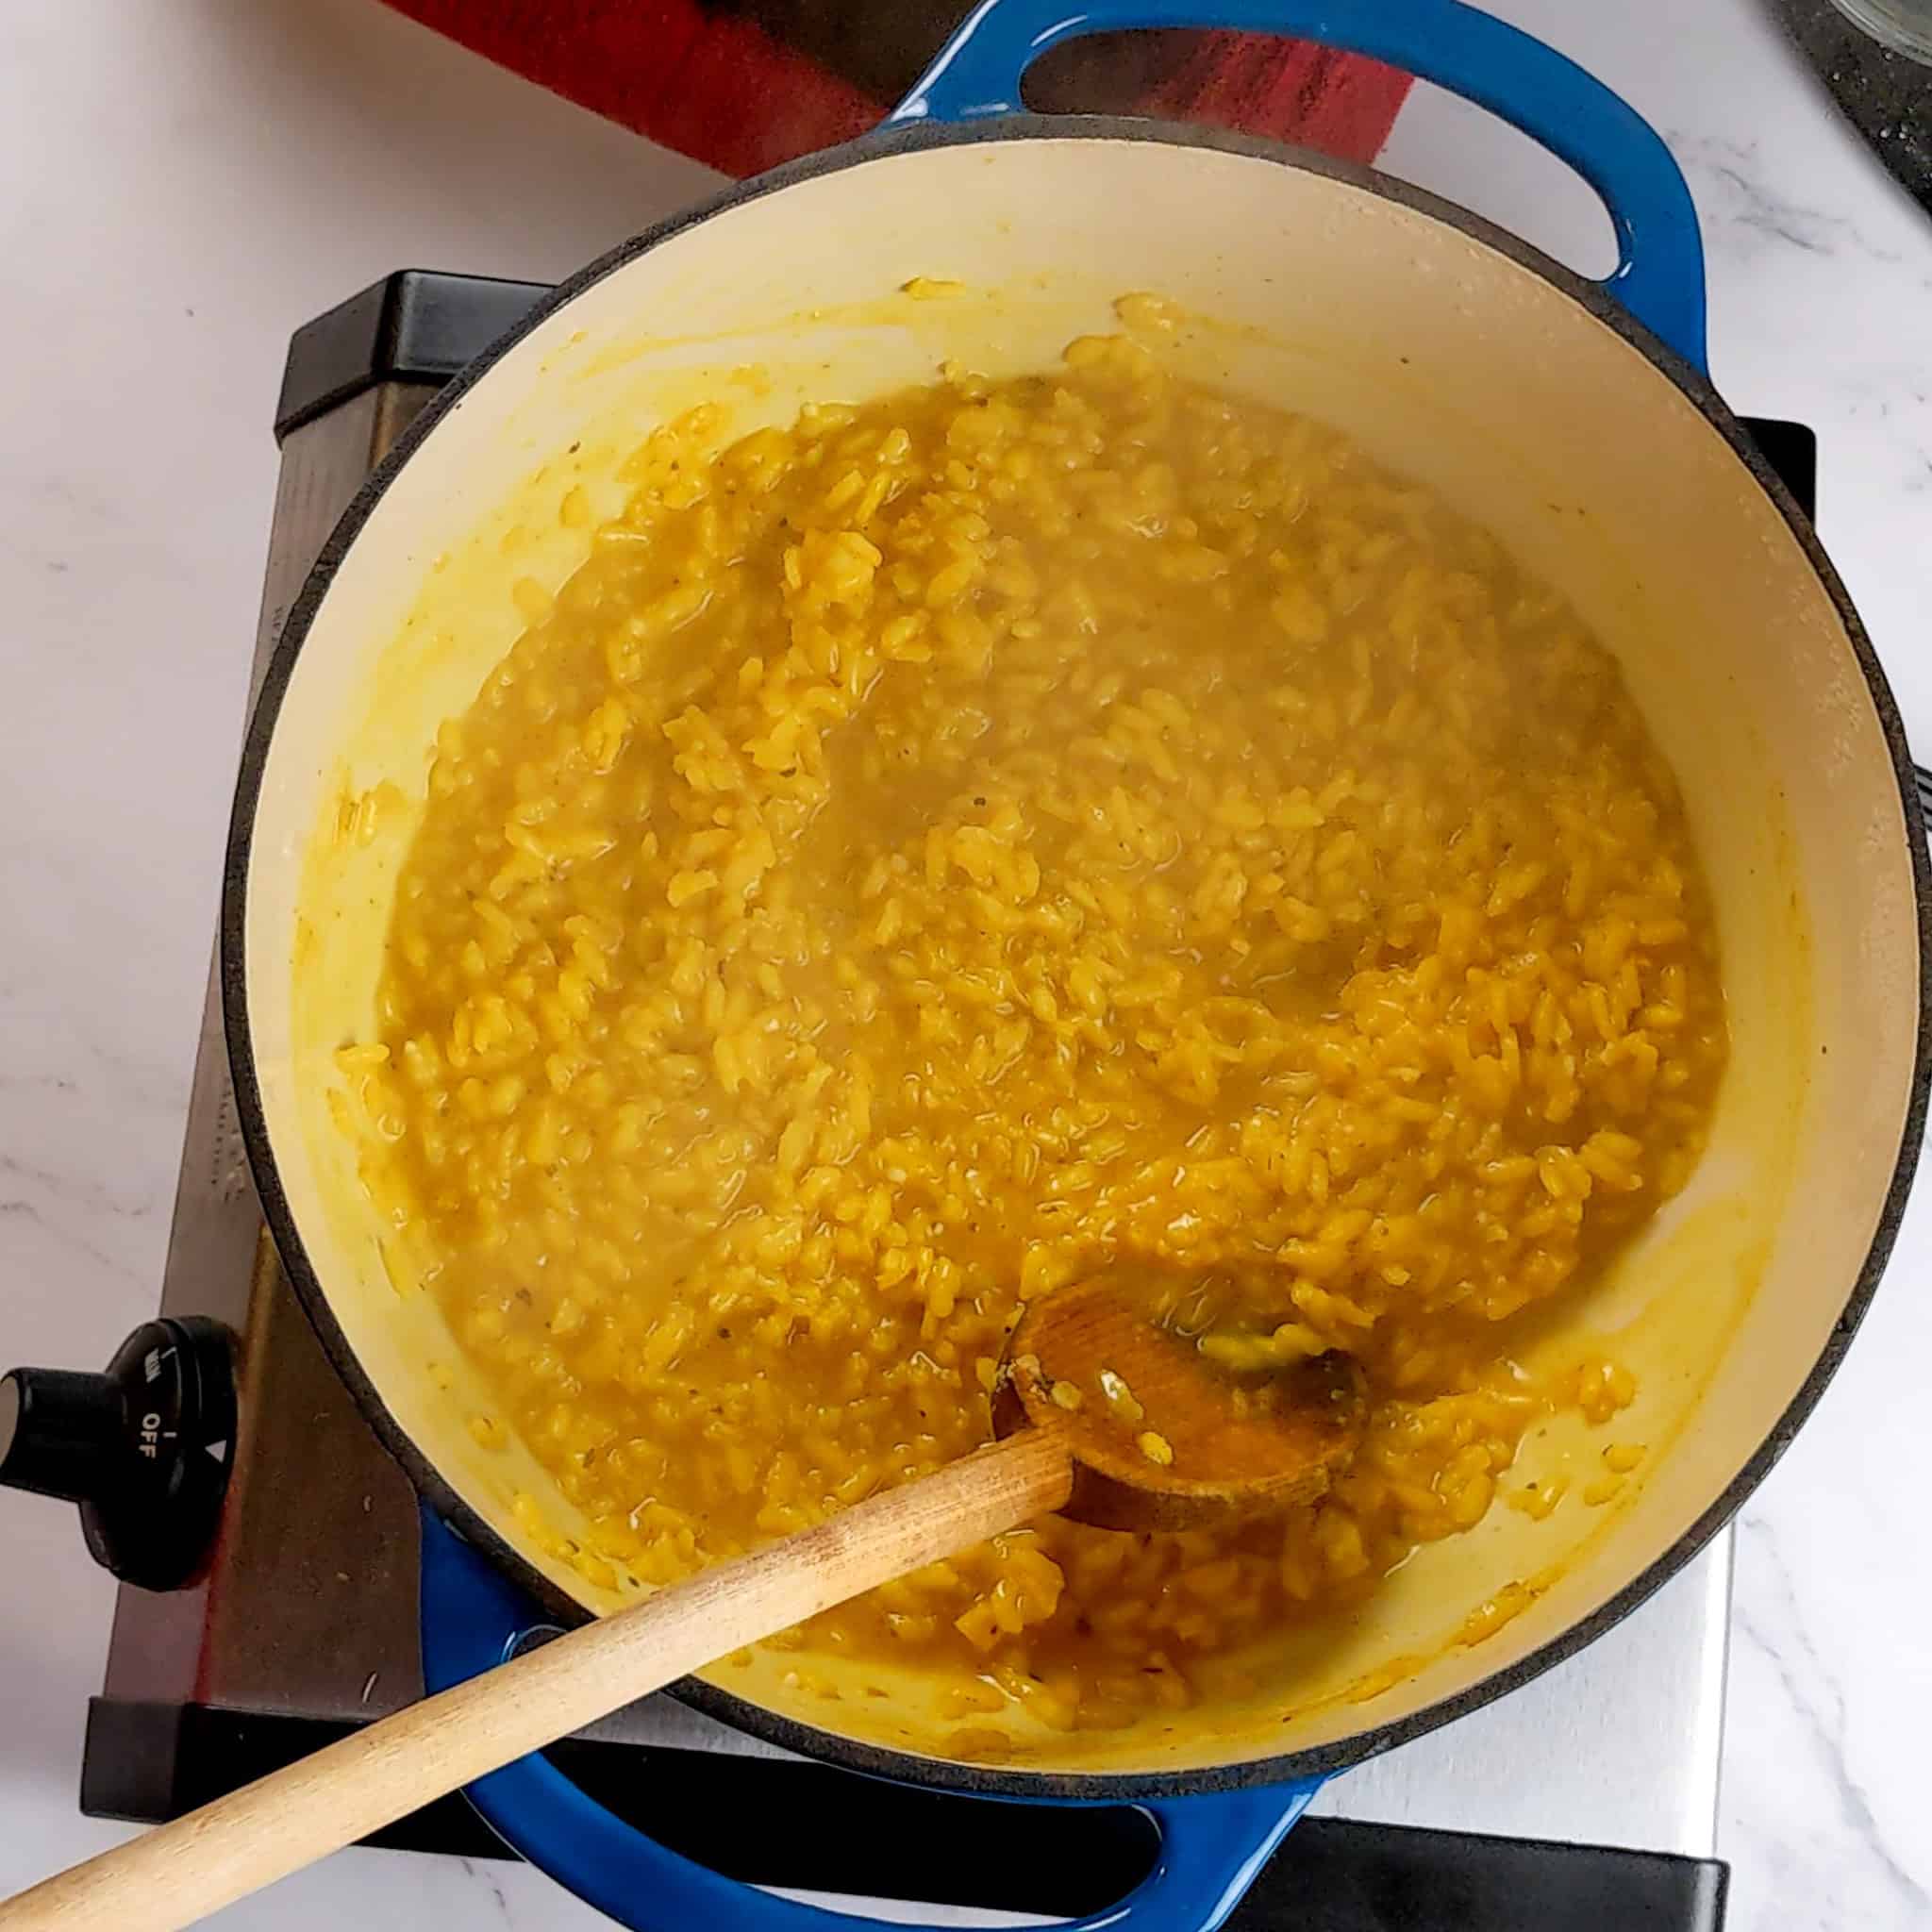 a spoon resting in the finished yellow risotto.